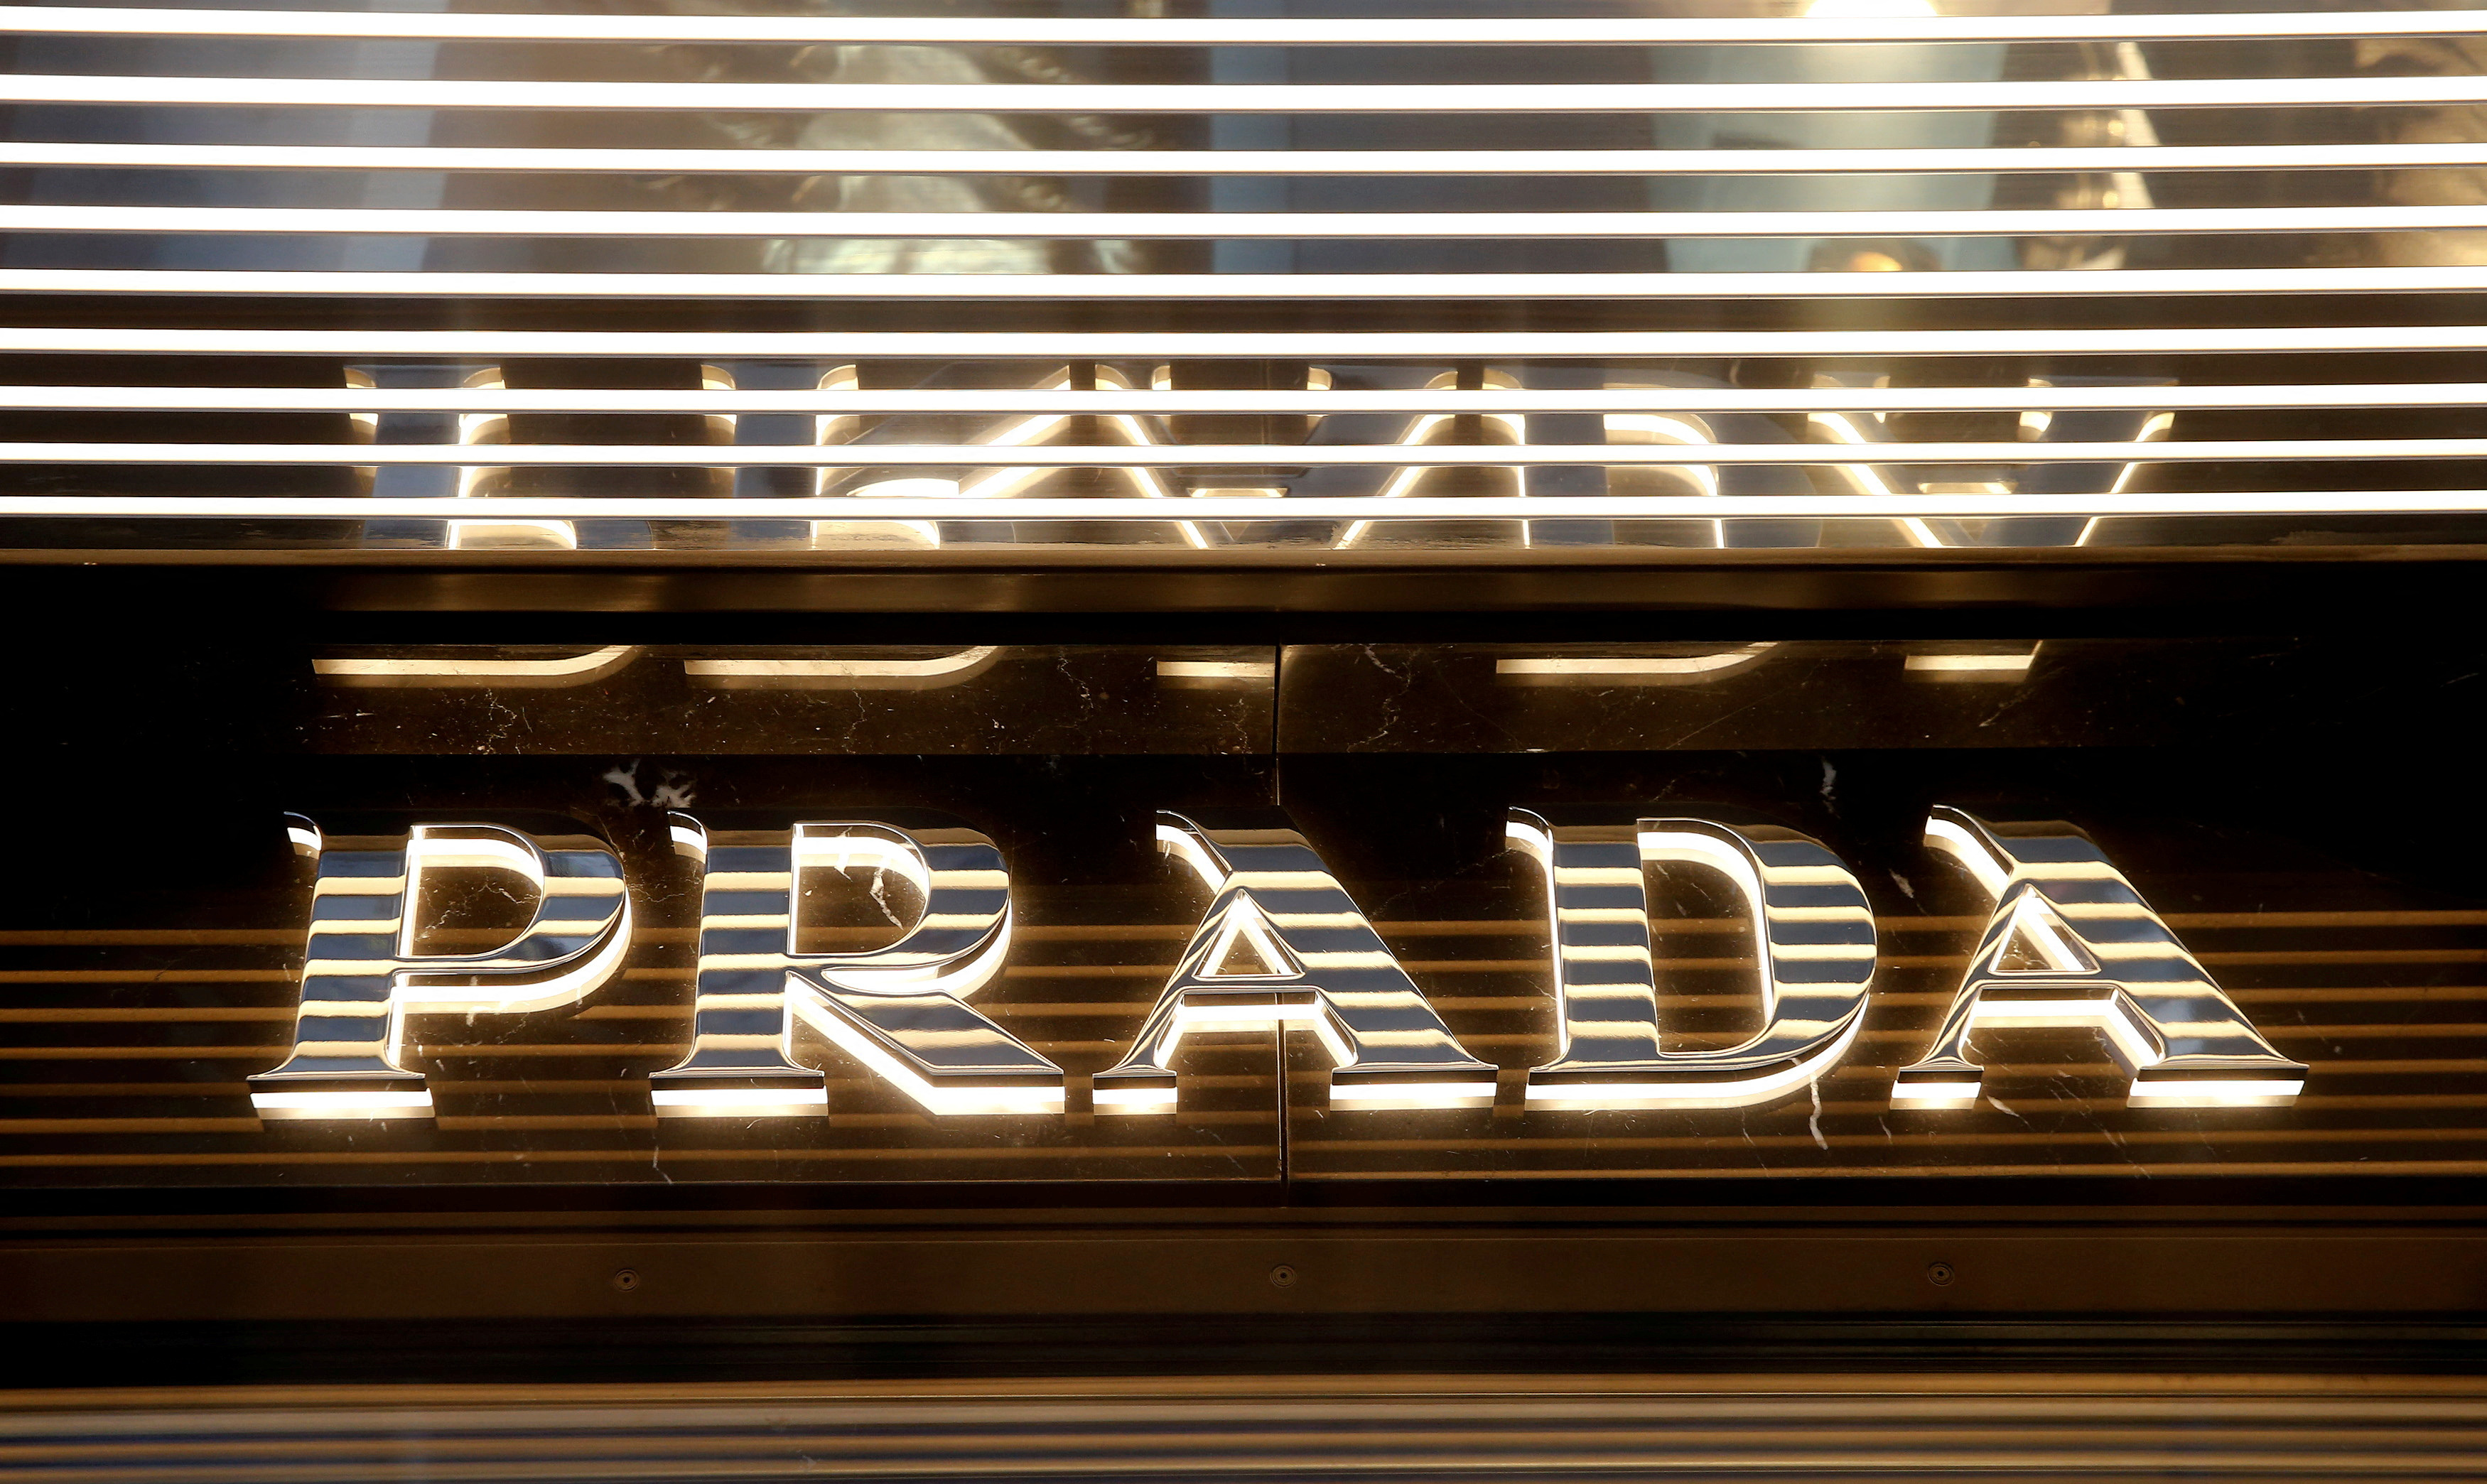 Which fashion brand is perceived as the most exclusive - Prada